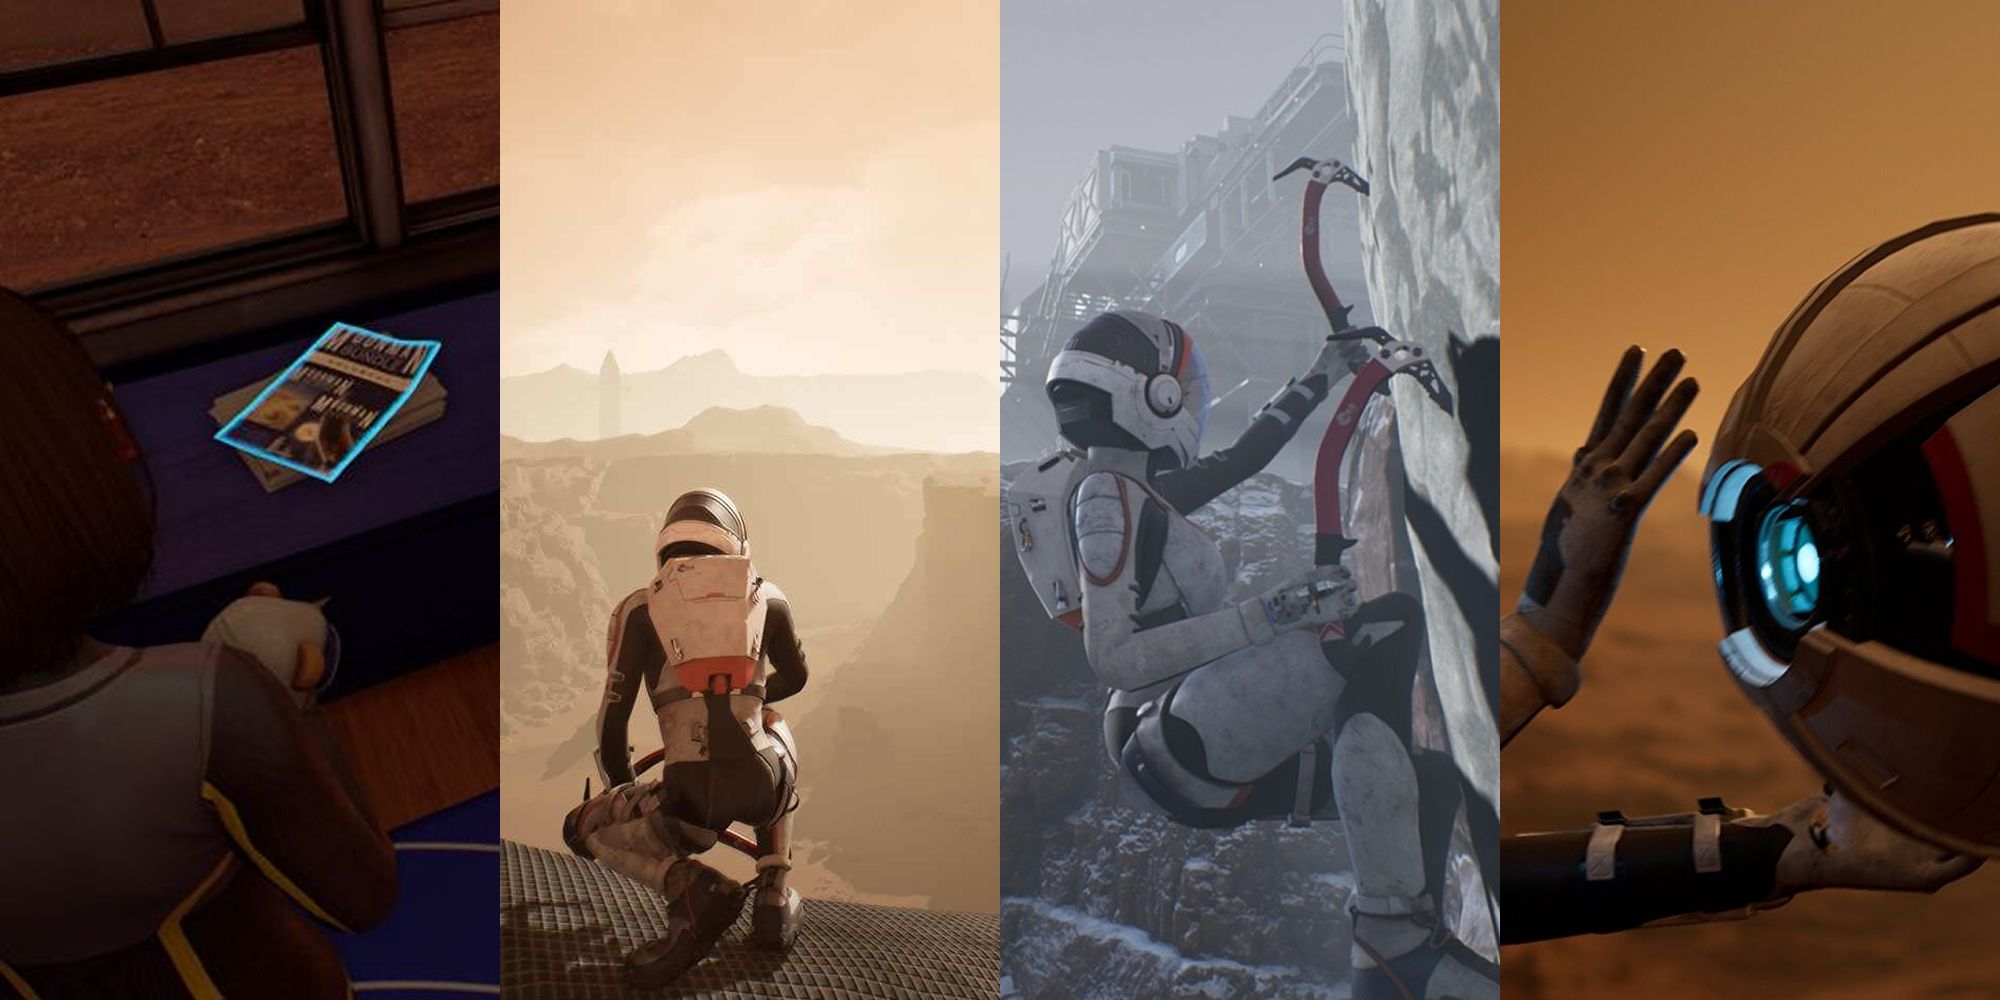 A Split Image Showing Scenes From Deliver Us Mars